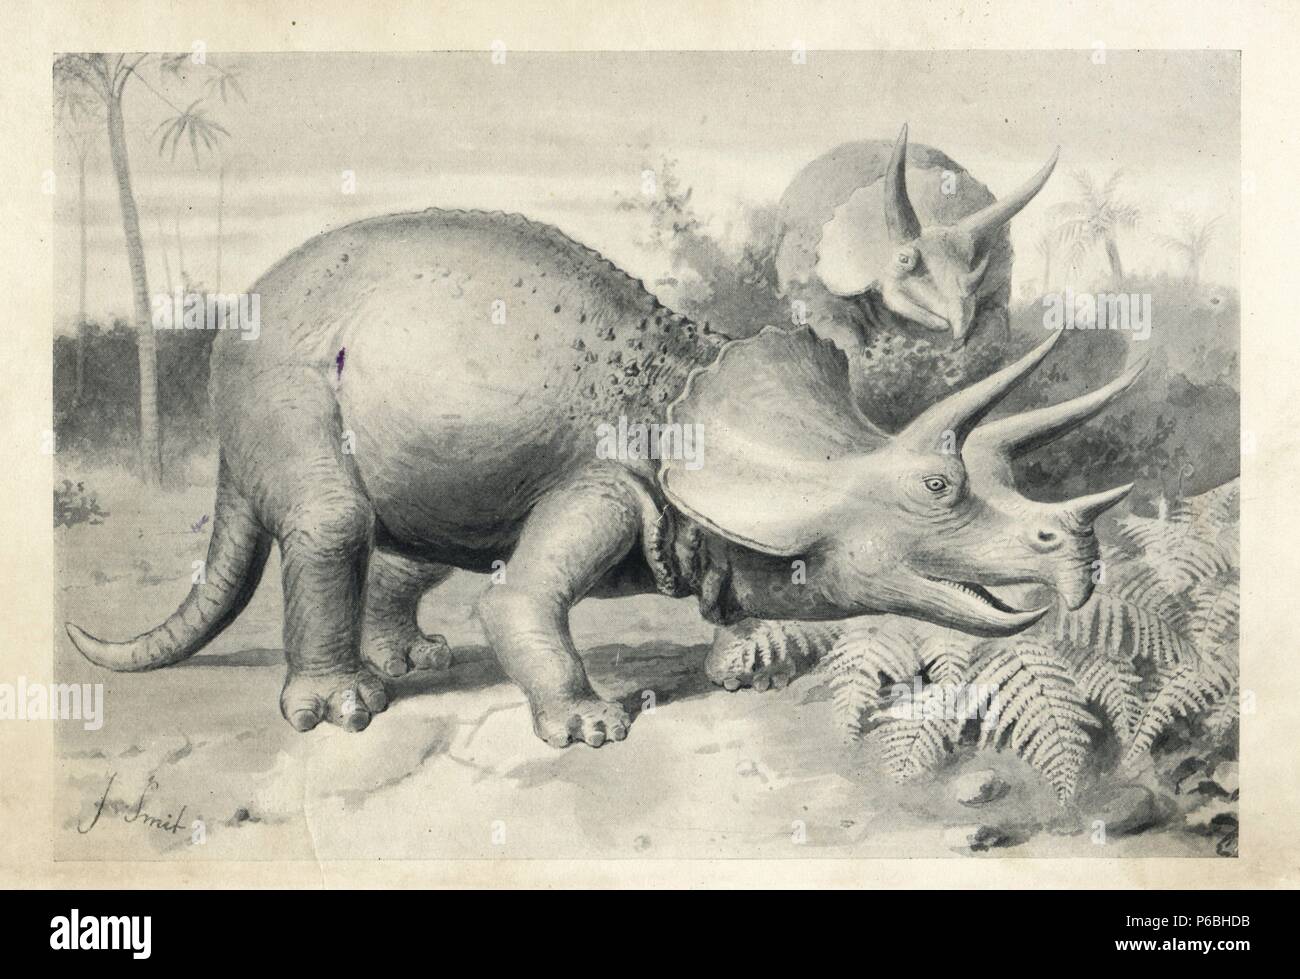 Triceratops prorsus, the last of the dinosaurs. Lithograph after an illustration by J. Smit from H. N. Hutchinson's 'Extinct Monsters and Creatures of Other Days,' Chapman and Hall, London, 1894. Stock Photo